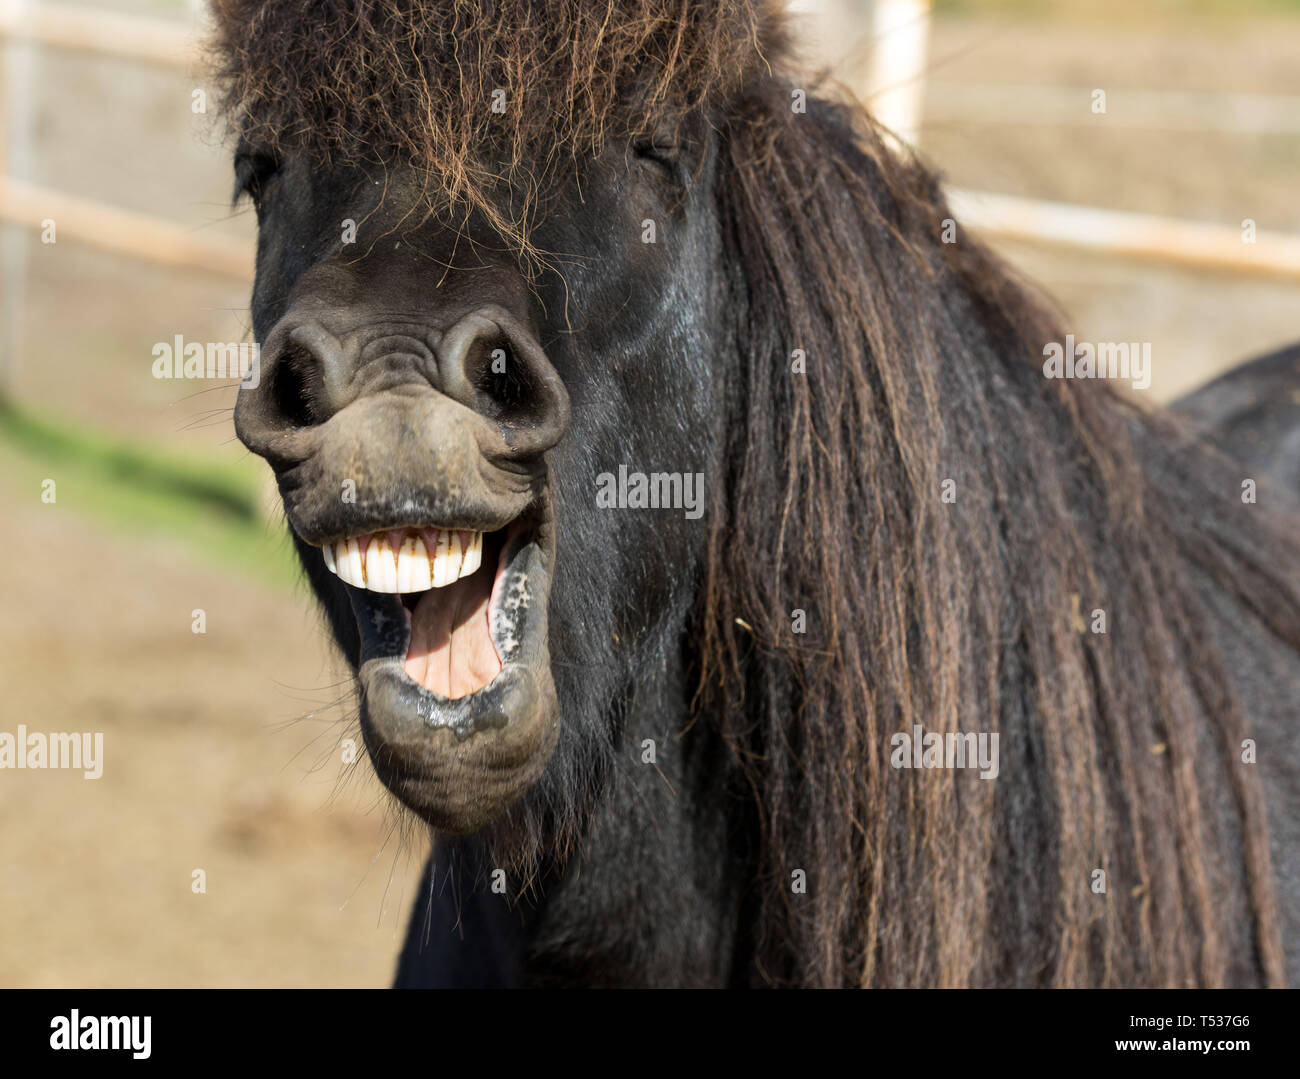 Funny icelandic horse smiling and laughing with large teeth. Selective focus on the teeth and nose Stock Photo